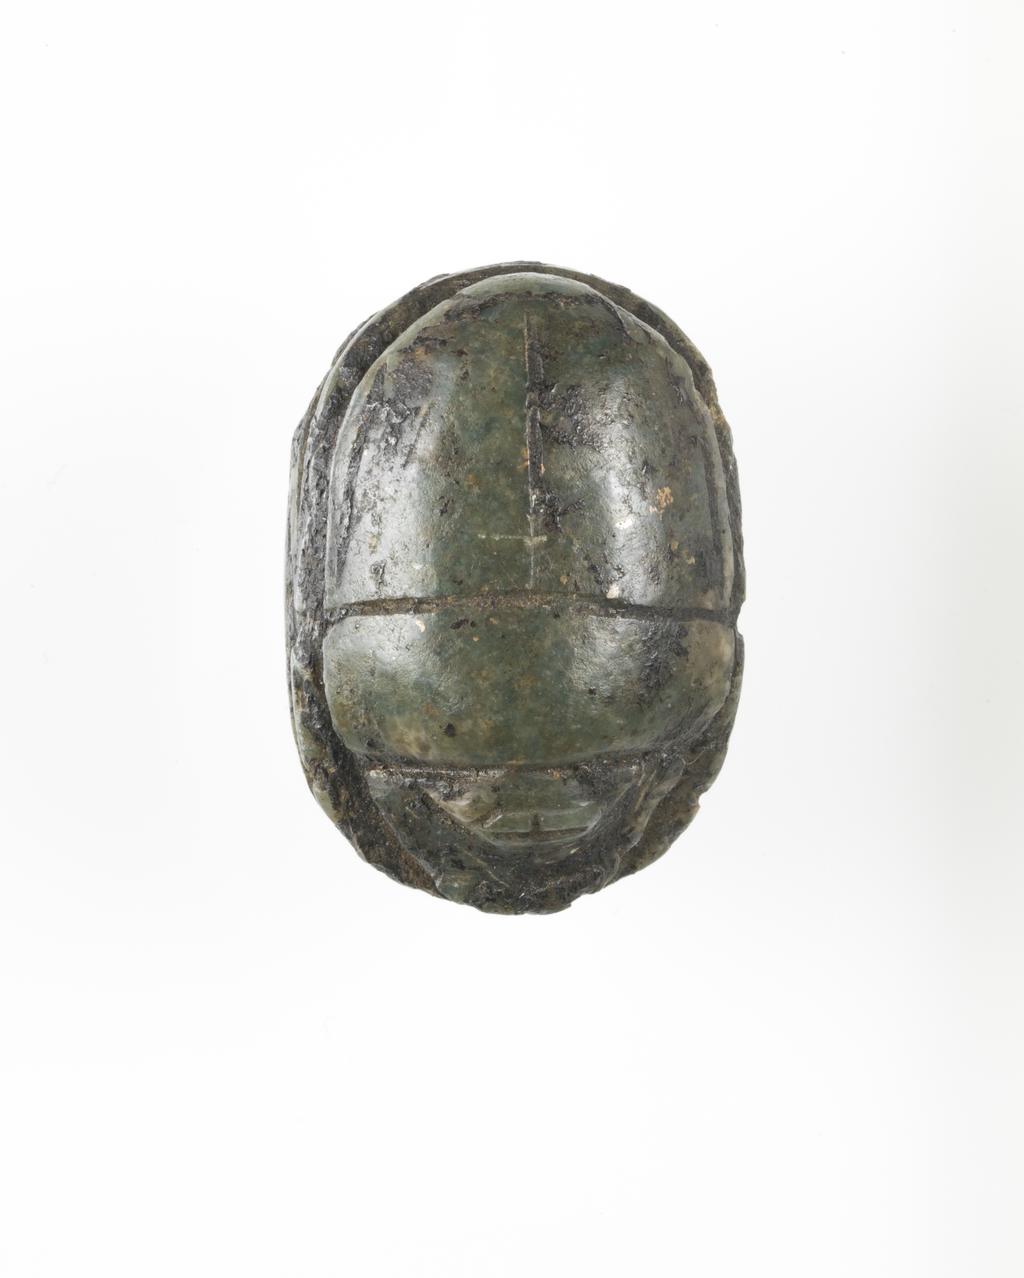 An image of Scarab. Heart scarab, uninscribed found on Nekhtefmut's chest. Production Place: Egypt. Find Spot: Ramesseum, Thebes, Egypt. Depth 1.2 cm, length 2.6 cm, width 1.8 cm, circa 923 B.C. Twenty-second Dynasty. Third Intermediate period, reign of Osorkon I.